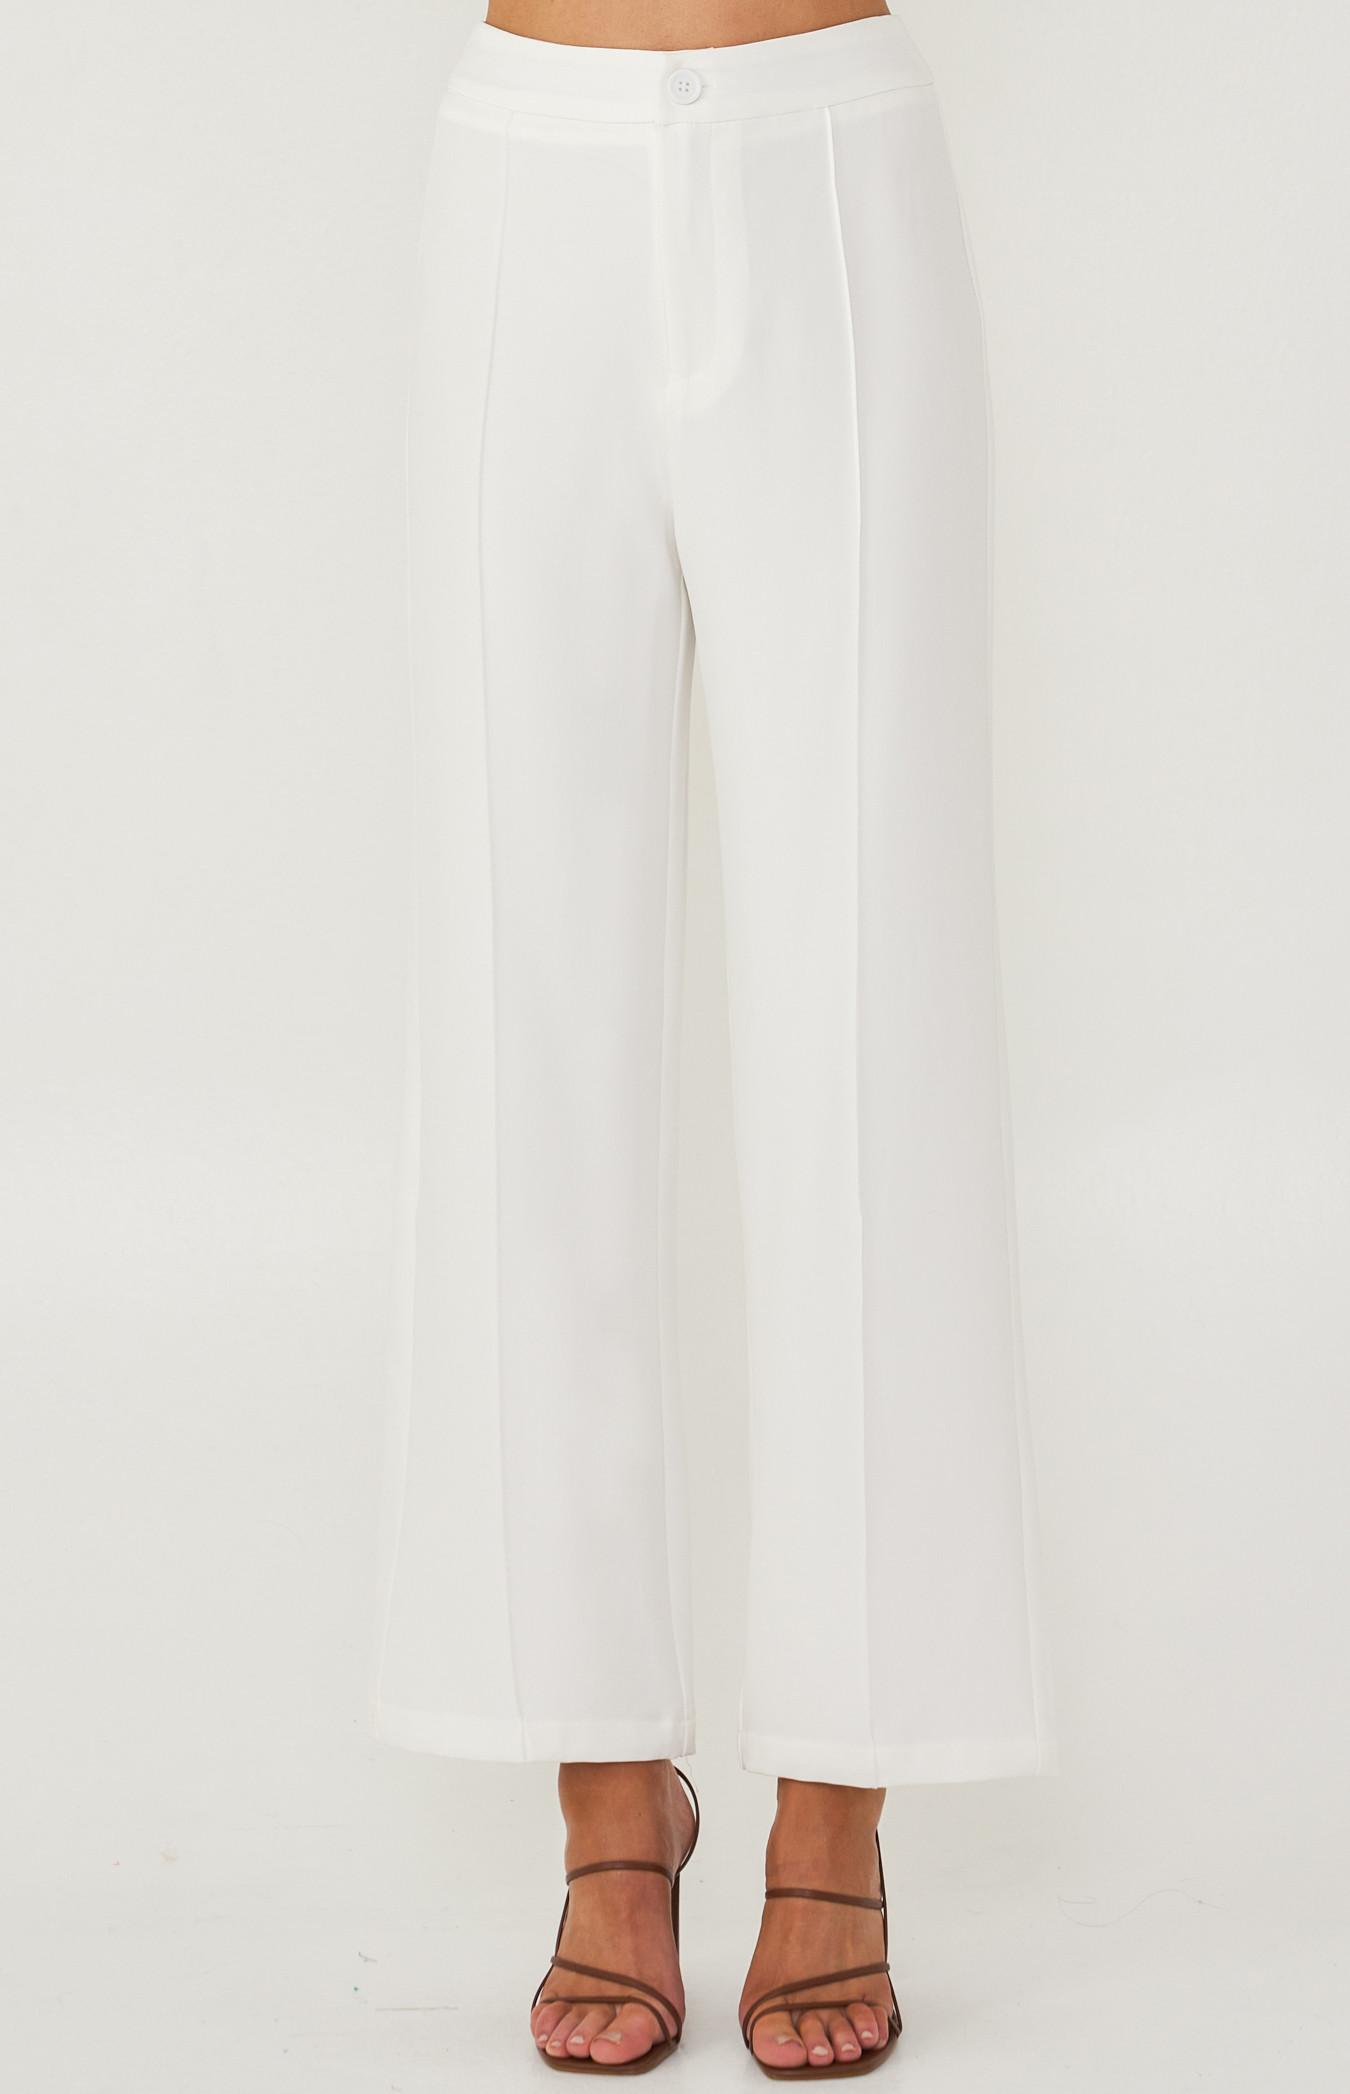 High Waisted Pants with Front Seam Details (WPA218B)